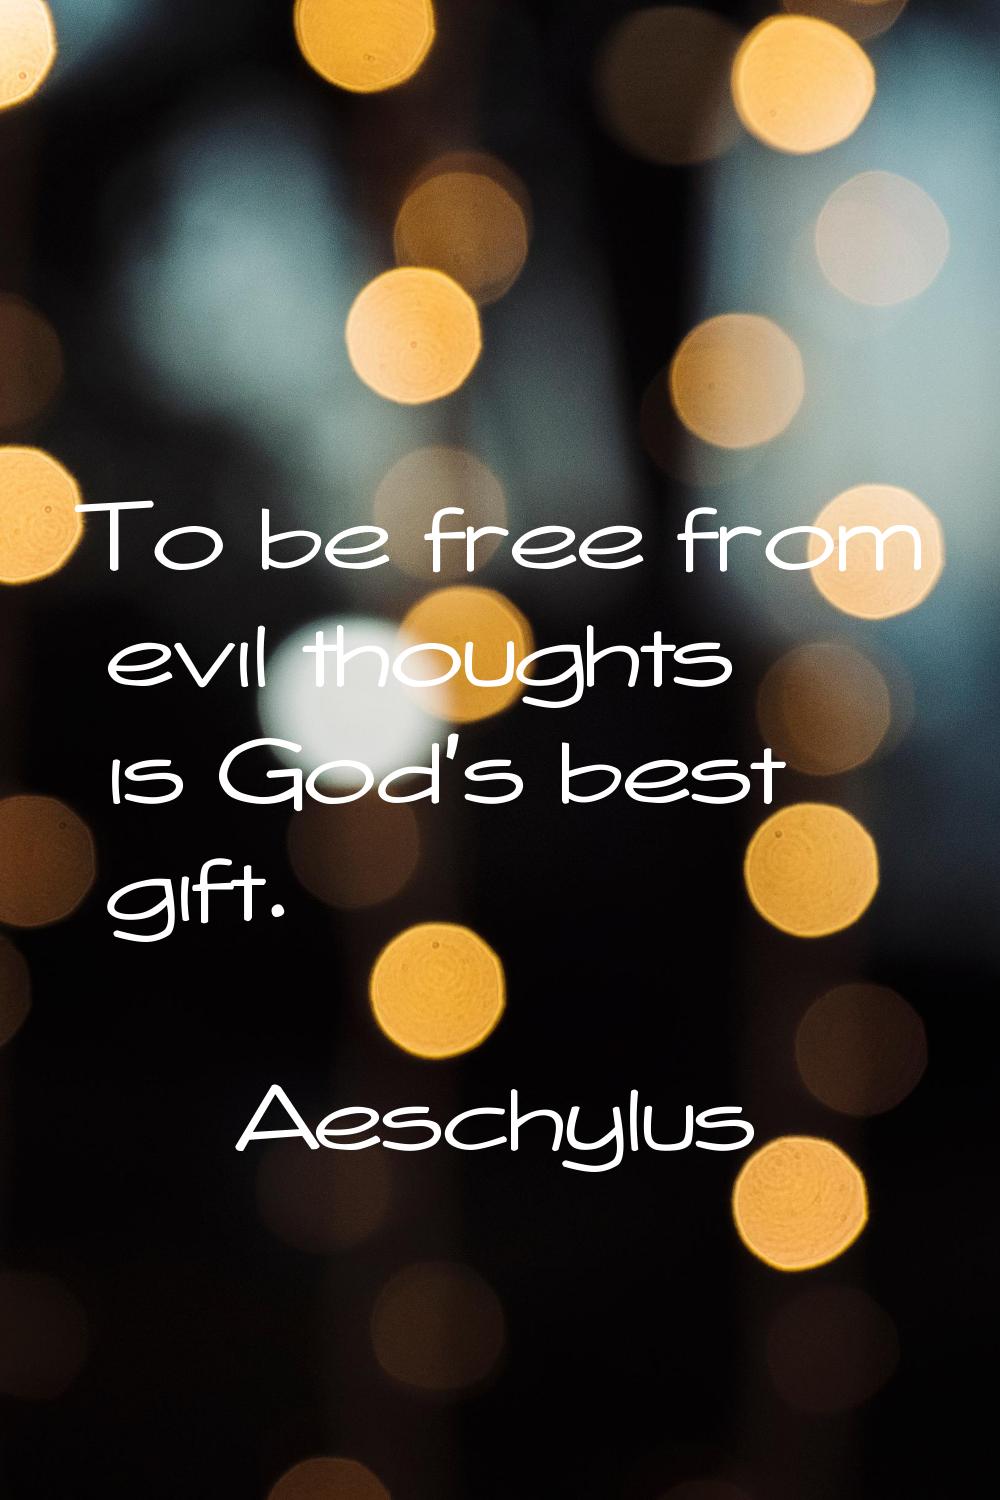 To be free from evil thoughts is God's best gift.